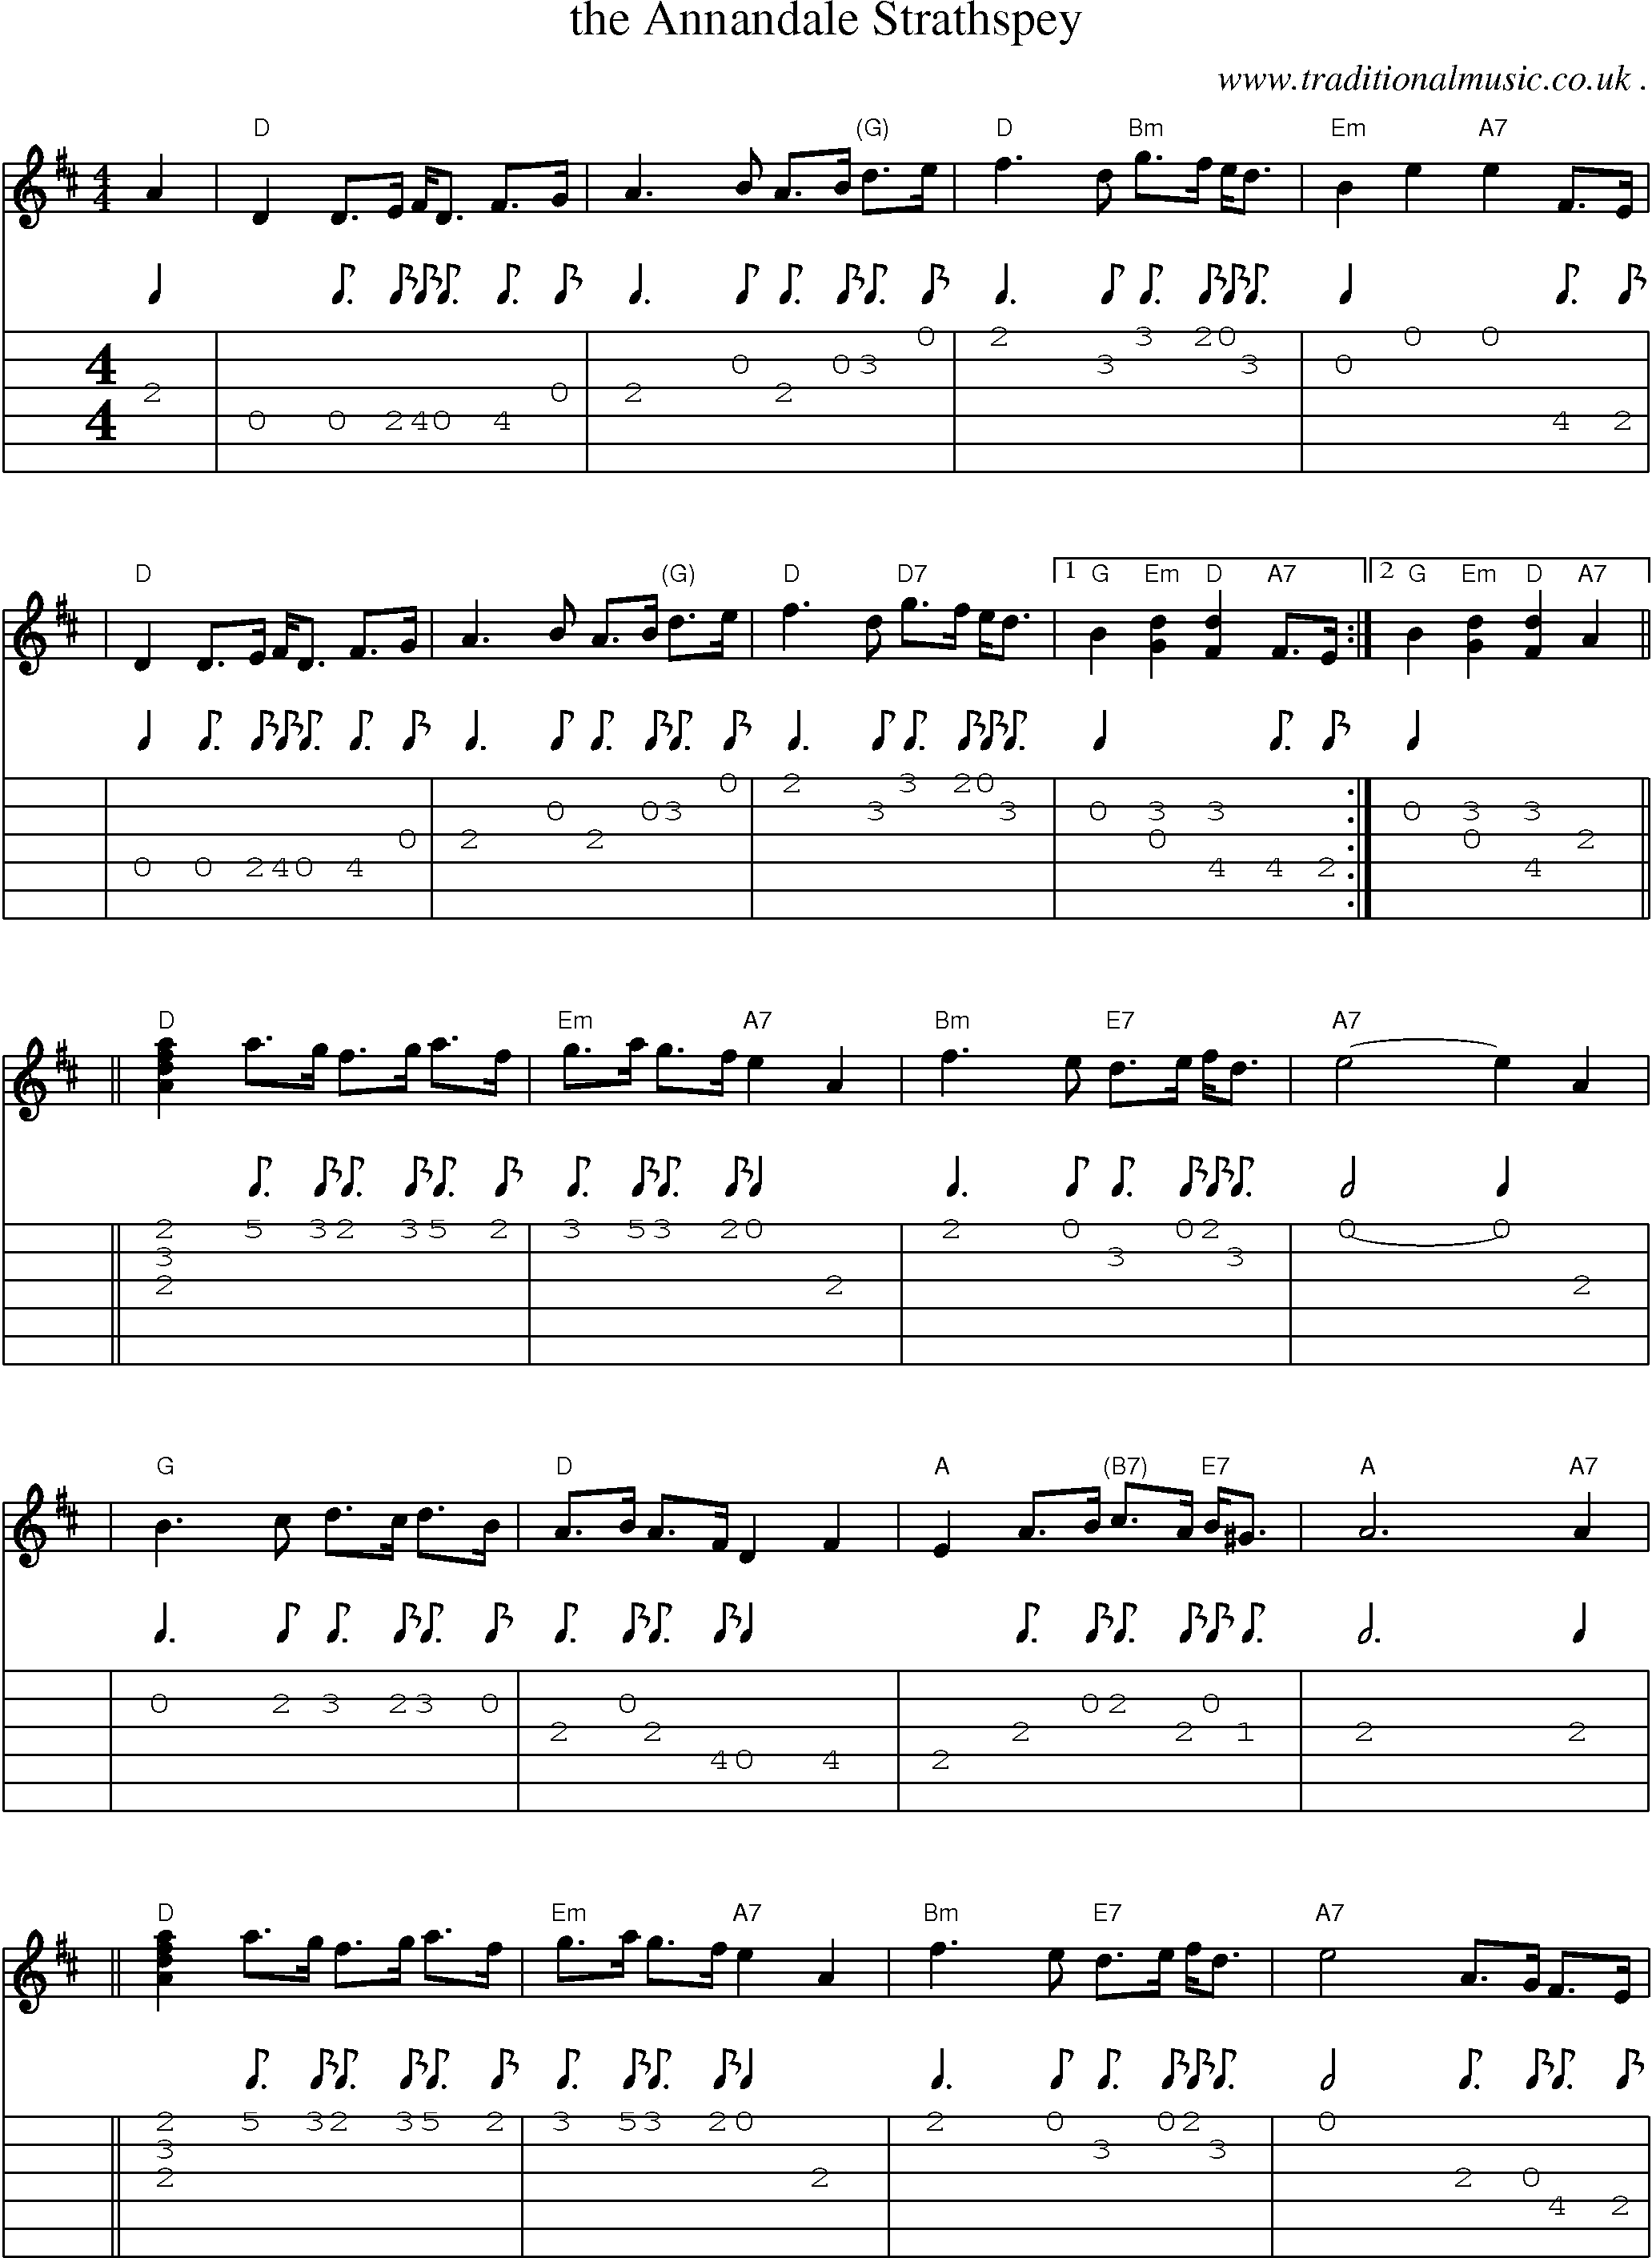 Sheet-music  score, Chords and Guitar Tabs for The Annandale Strathspey